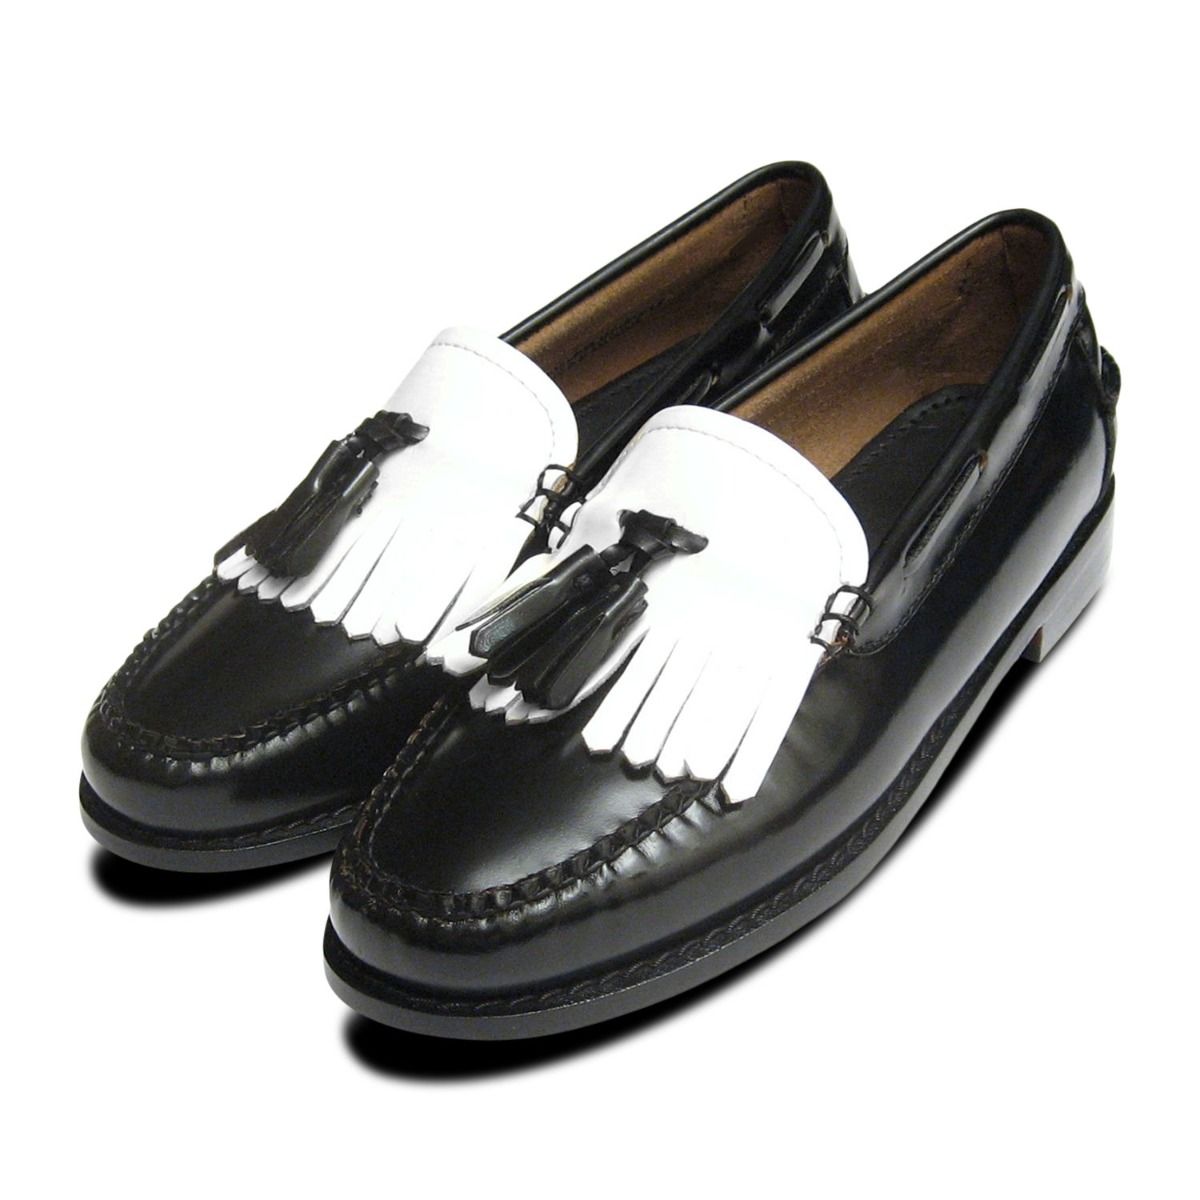 black and white loafer shoes